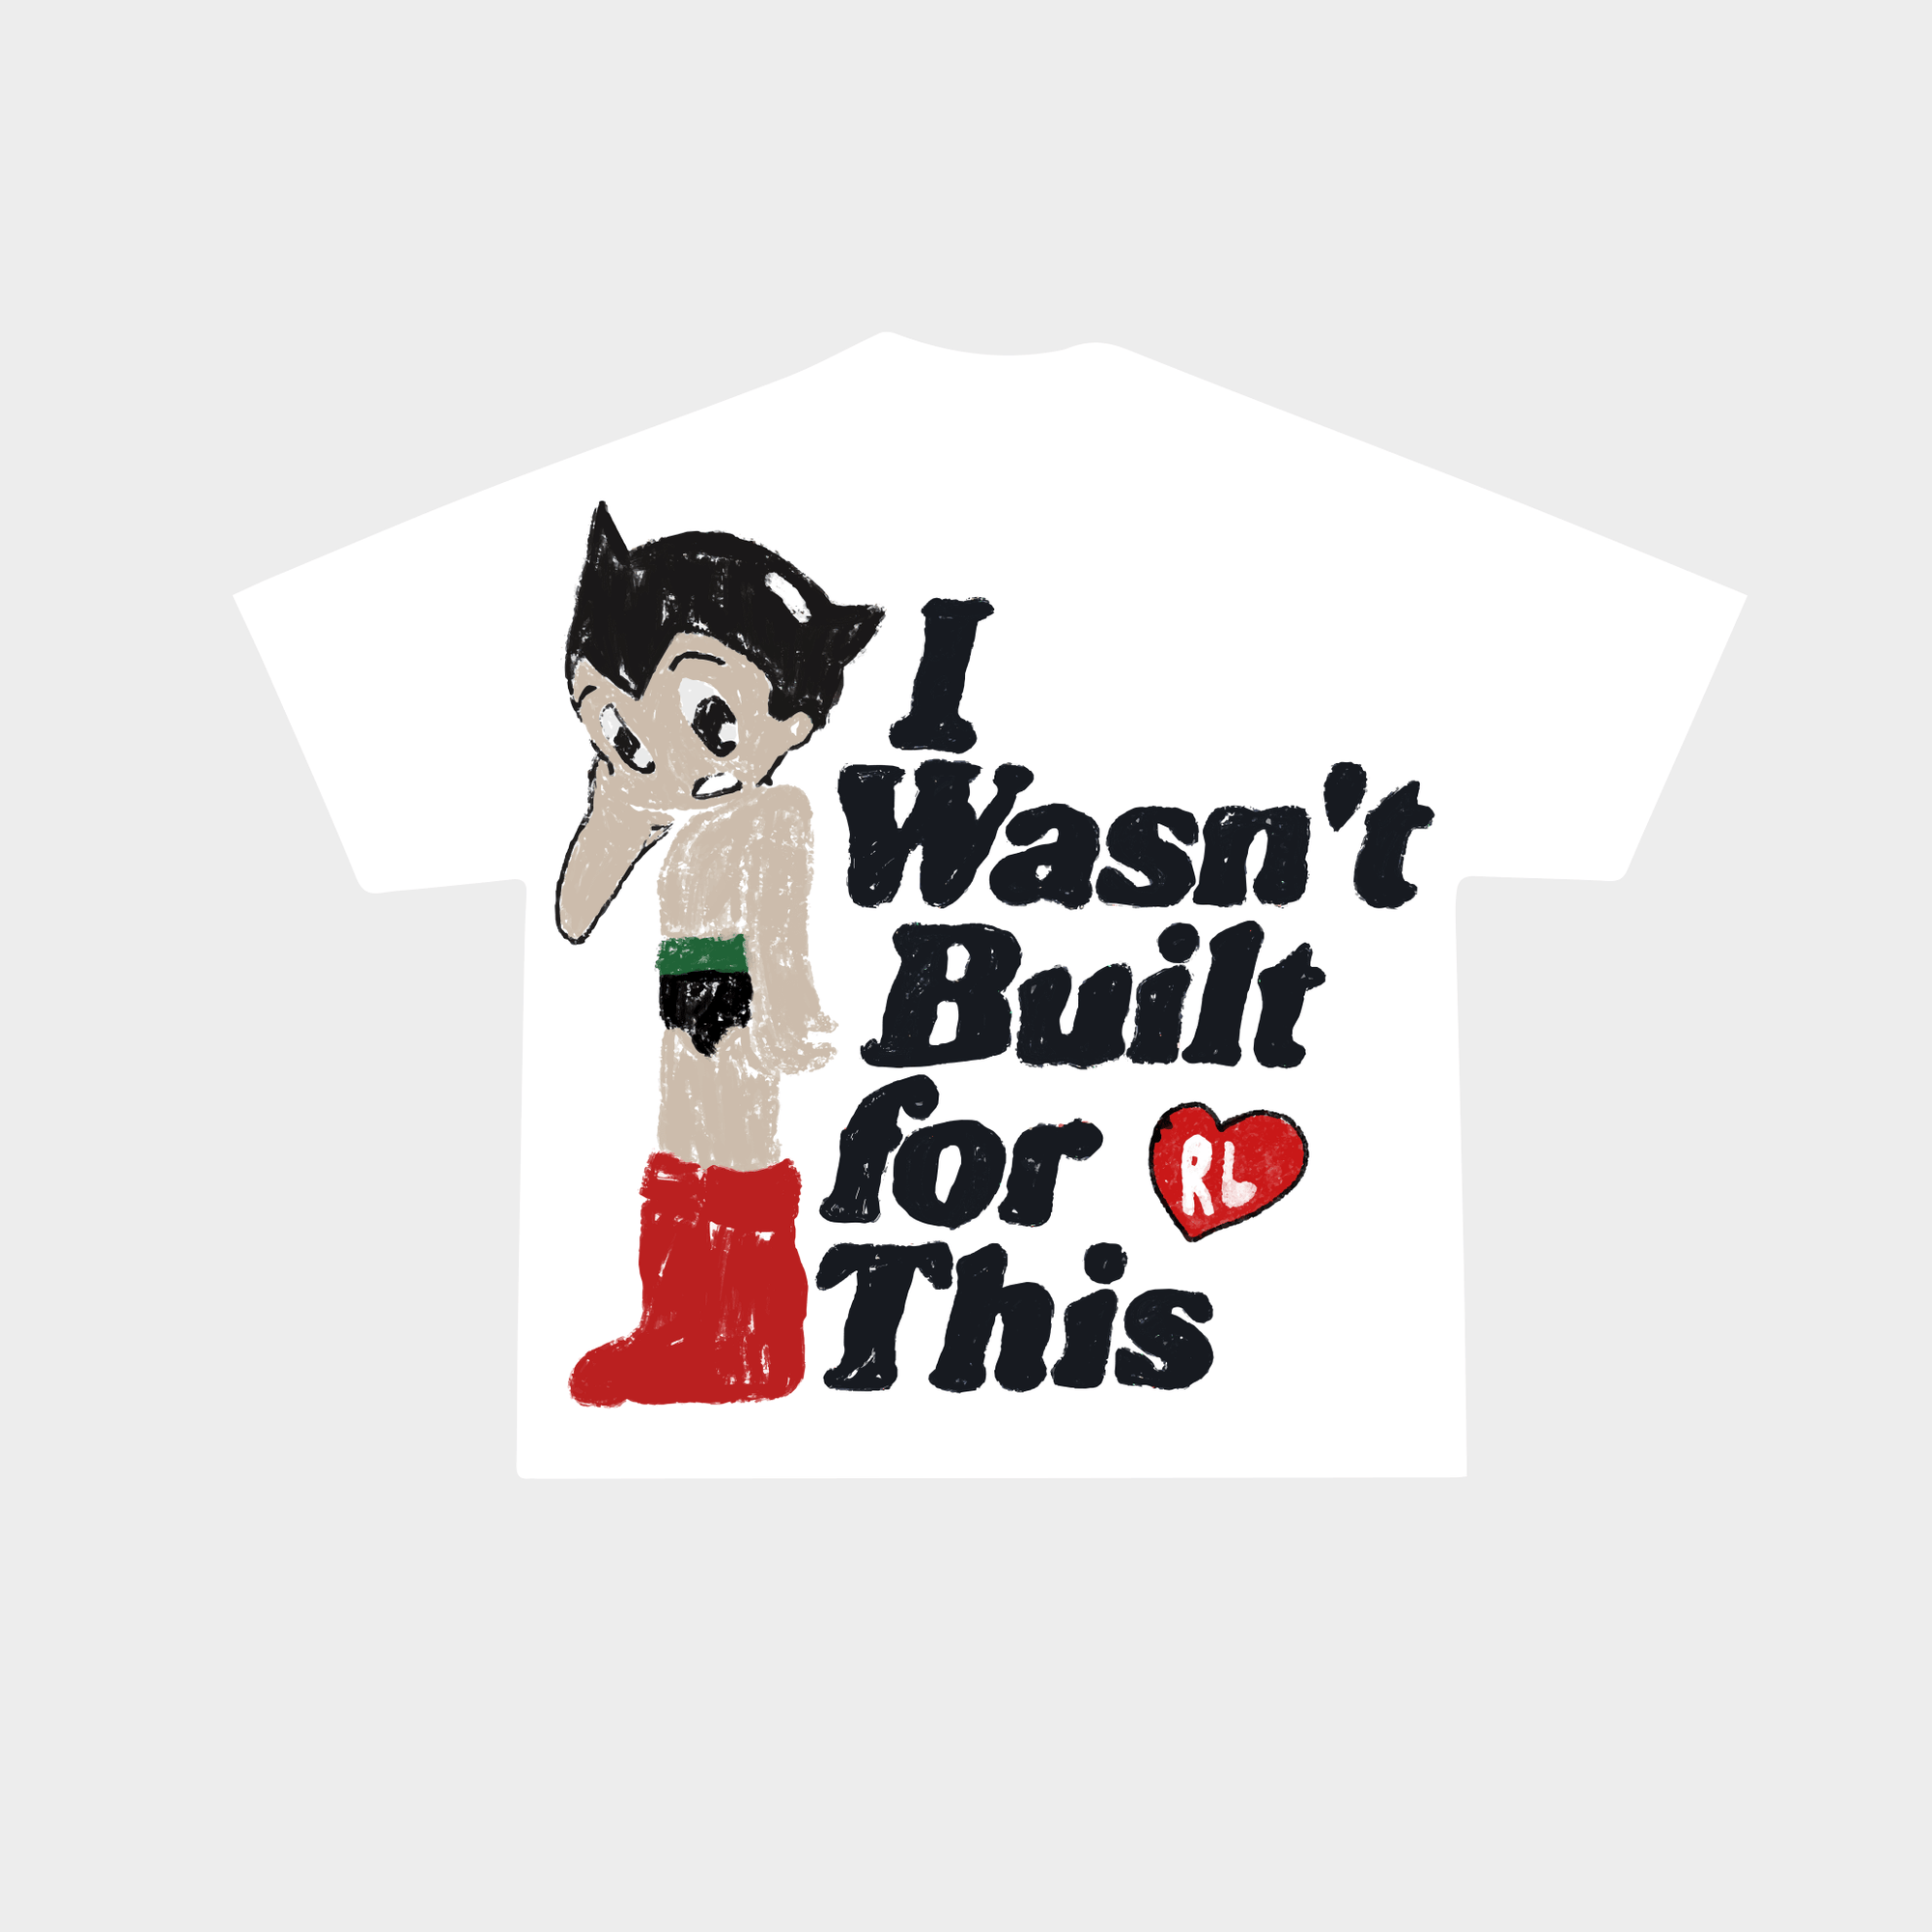 "Wasn't Built For This" Tee - RED LETTERS